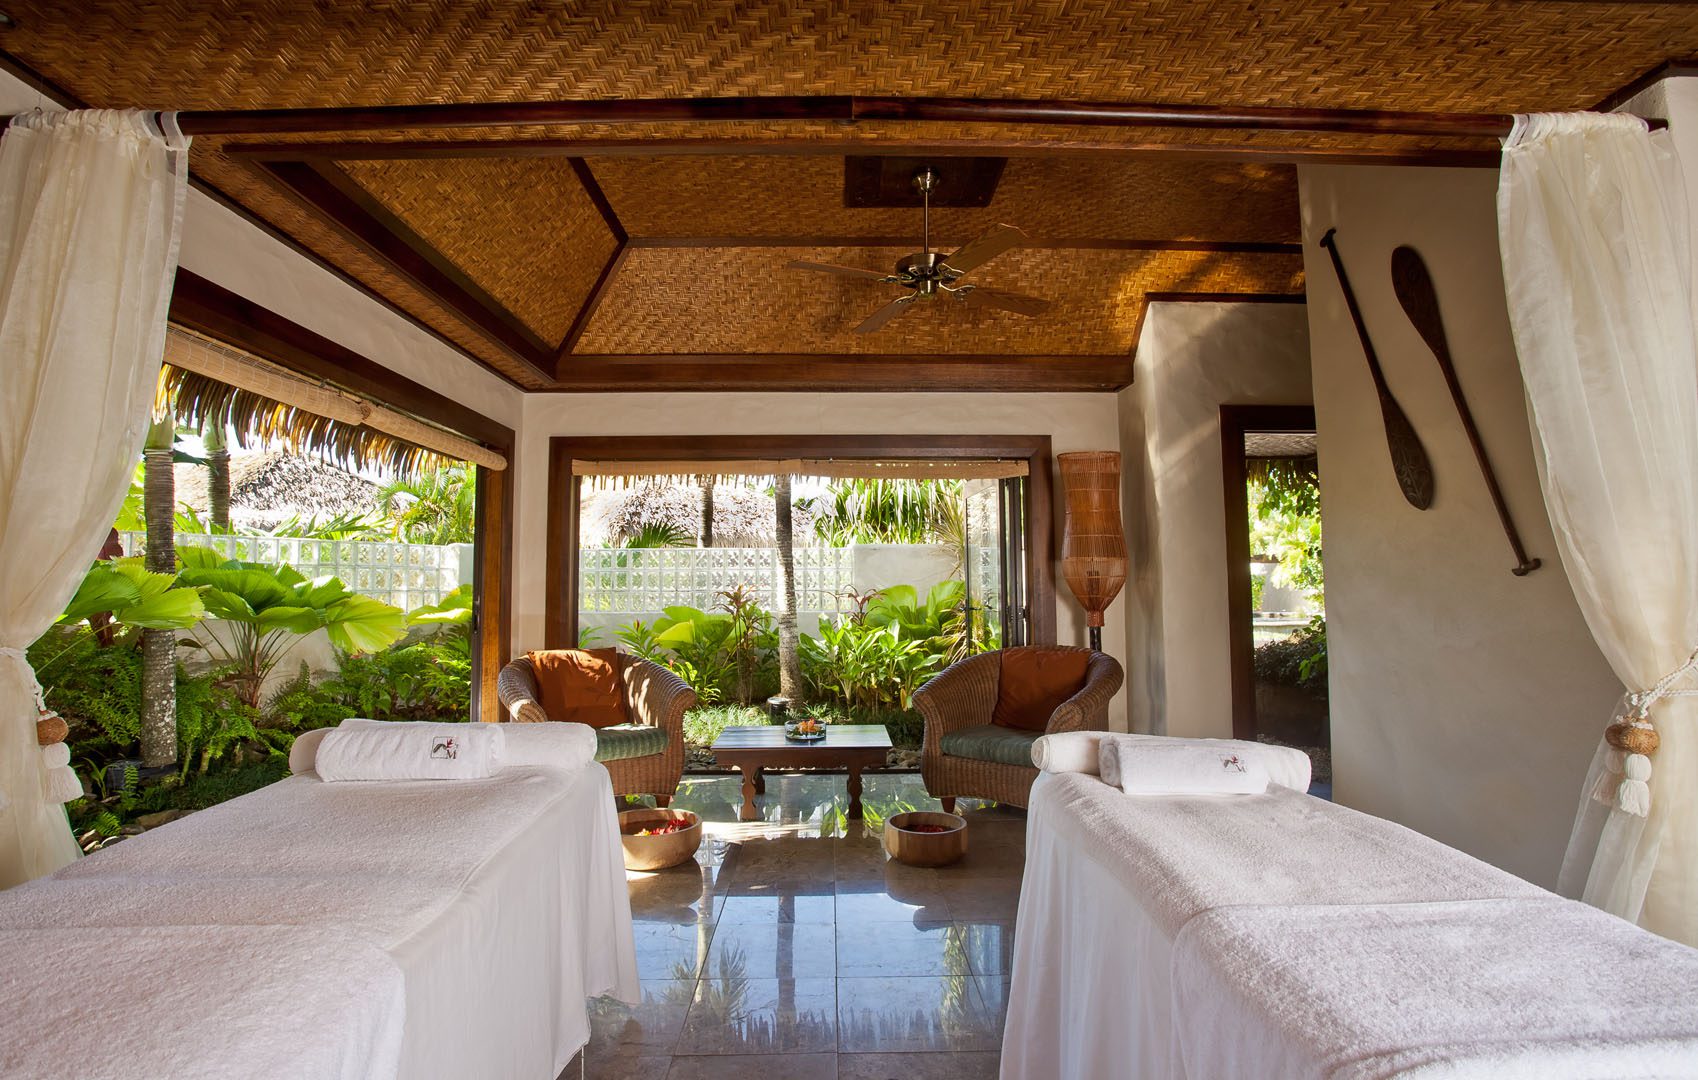 Luxurious spa with Polynesian inspired decor, looking out to the lush tropical gardens